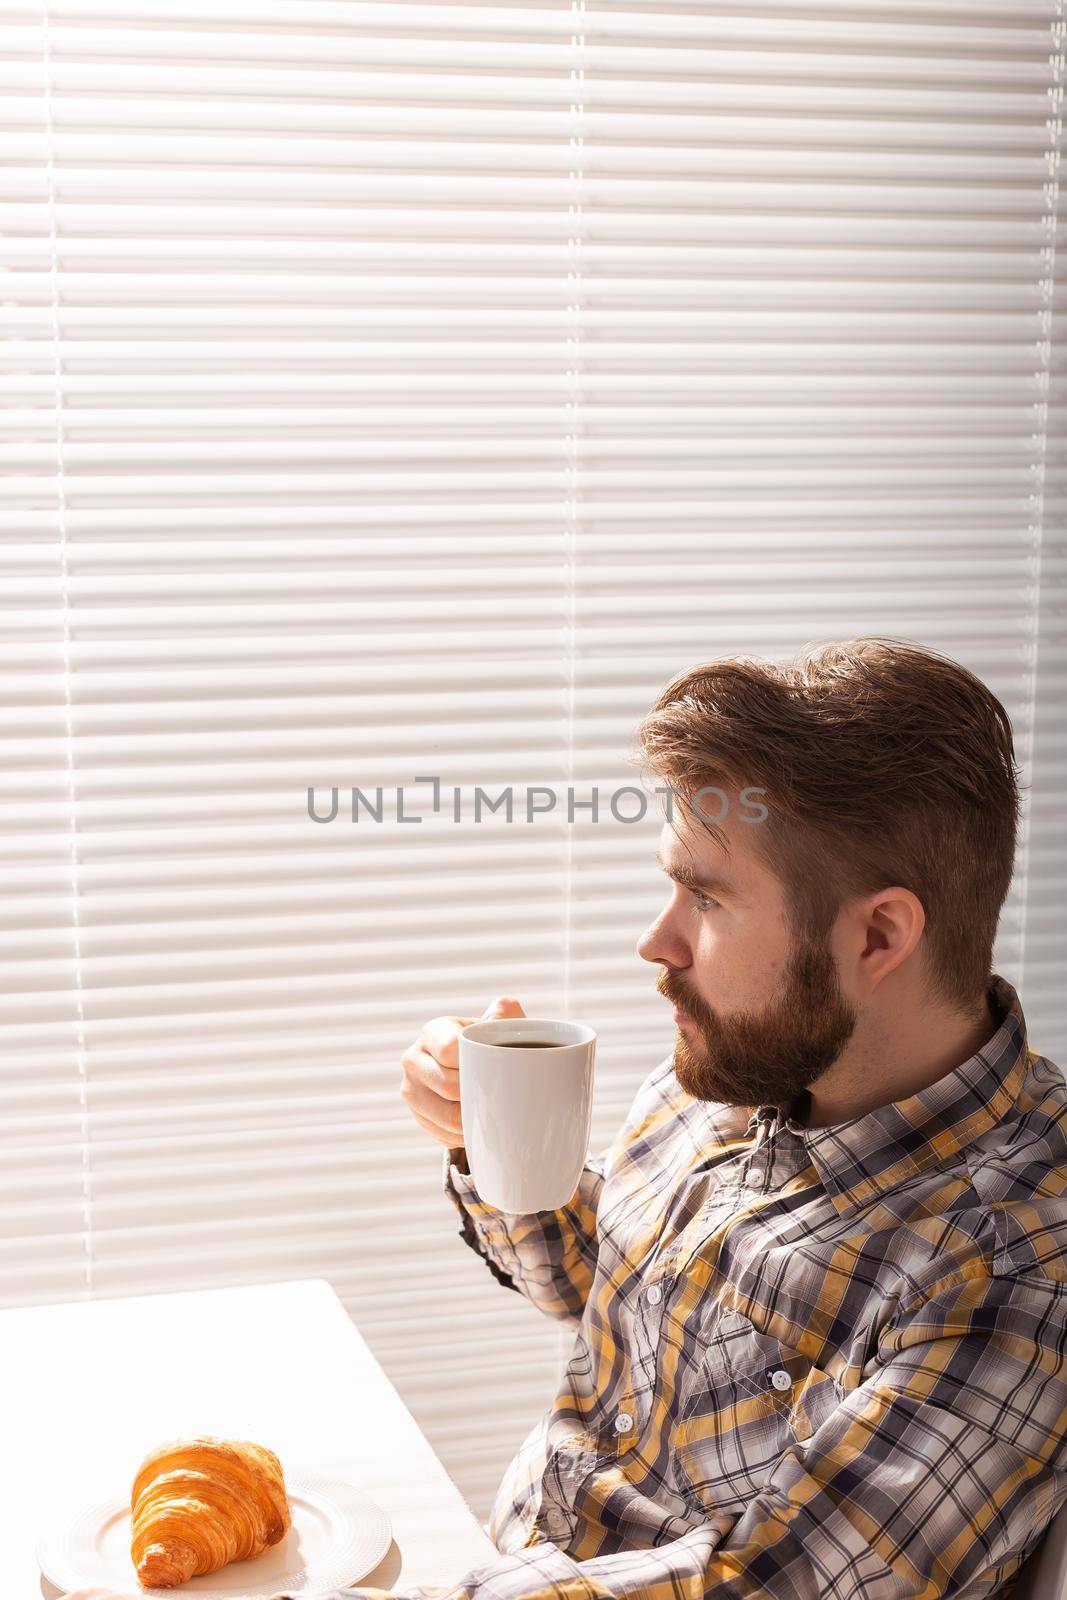 Pensive young bearded male businessman drinking cup of coffee on background of blinds. Concept of pleasant morning or lunch break. Copyspace